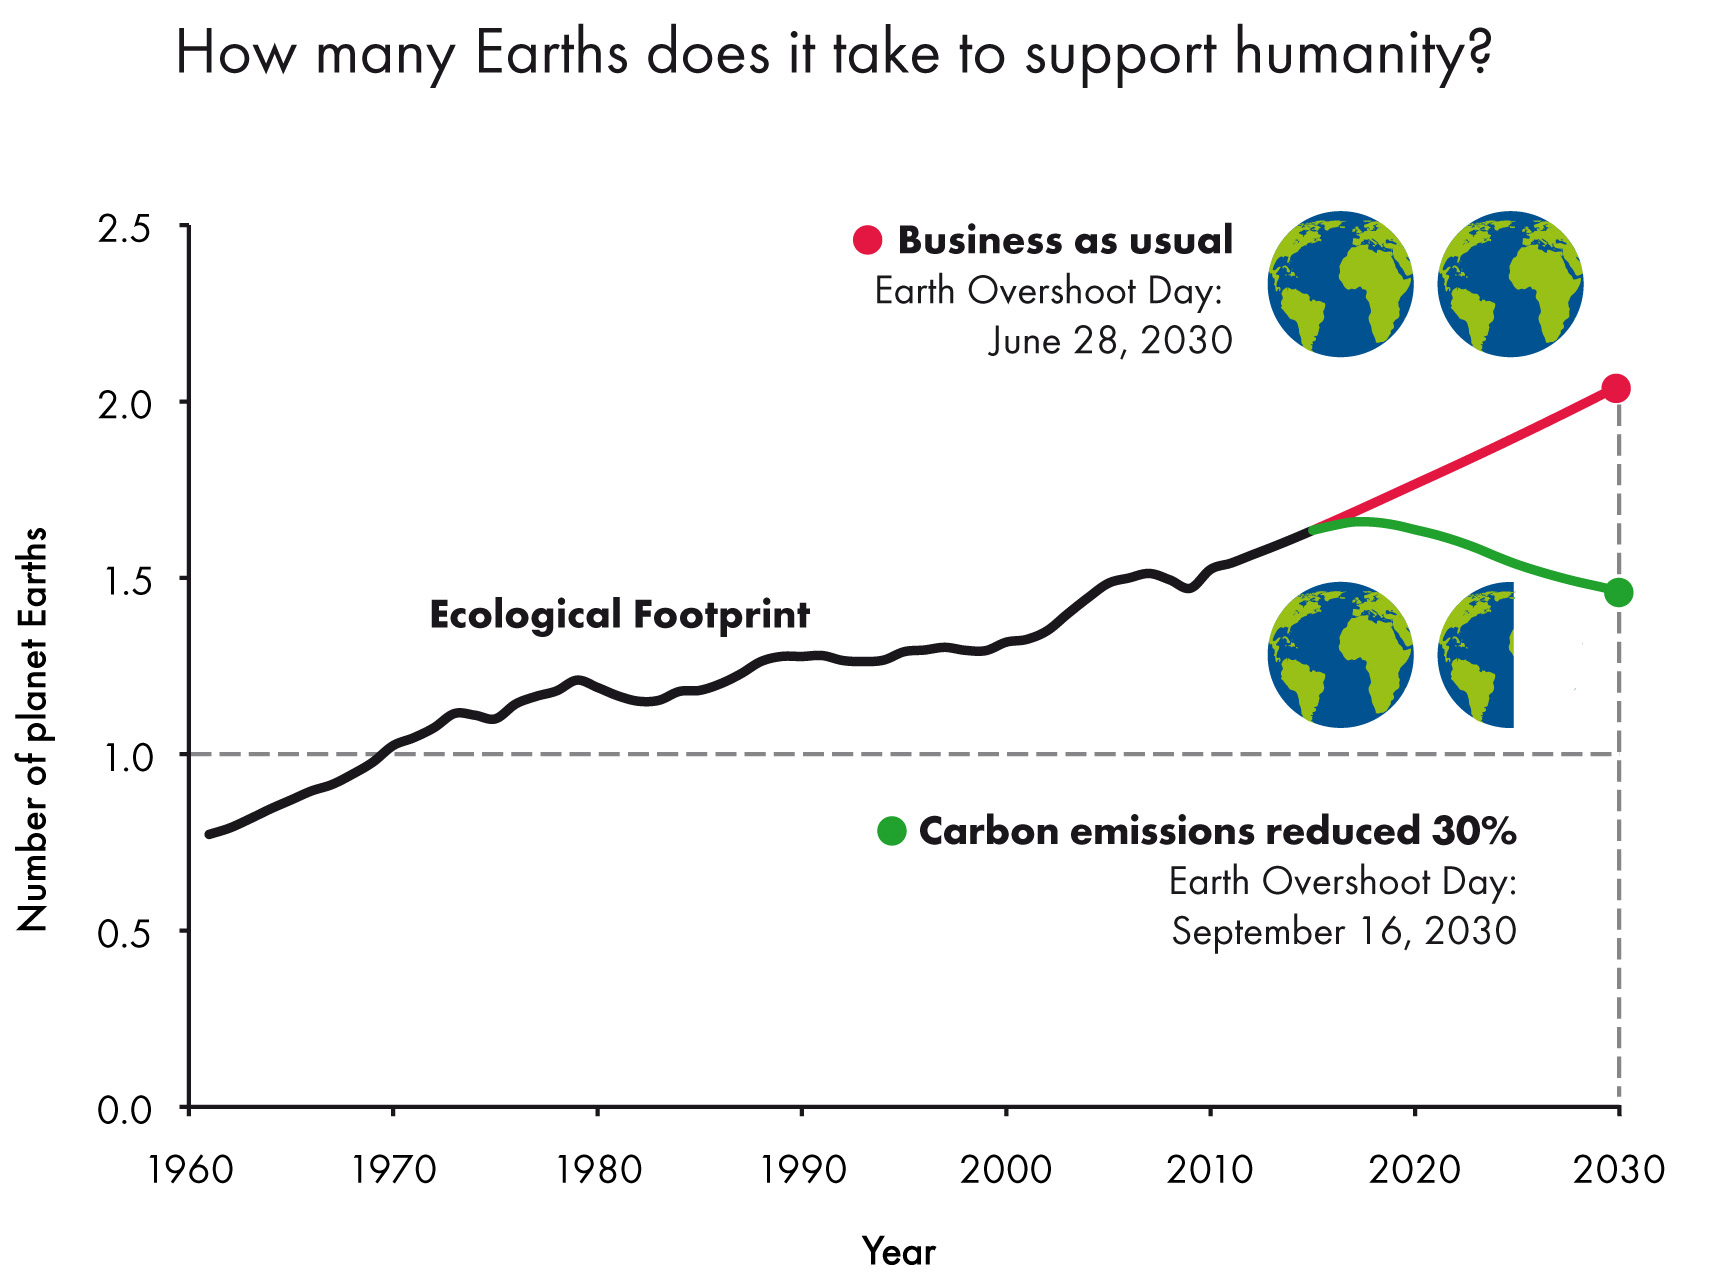 How many Earths does it take to support humanity?